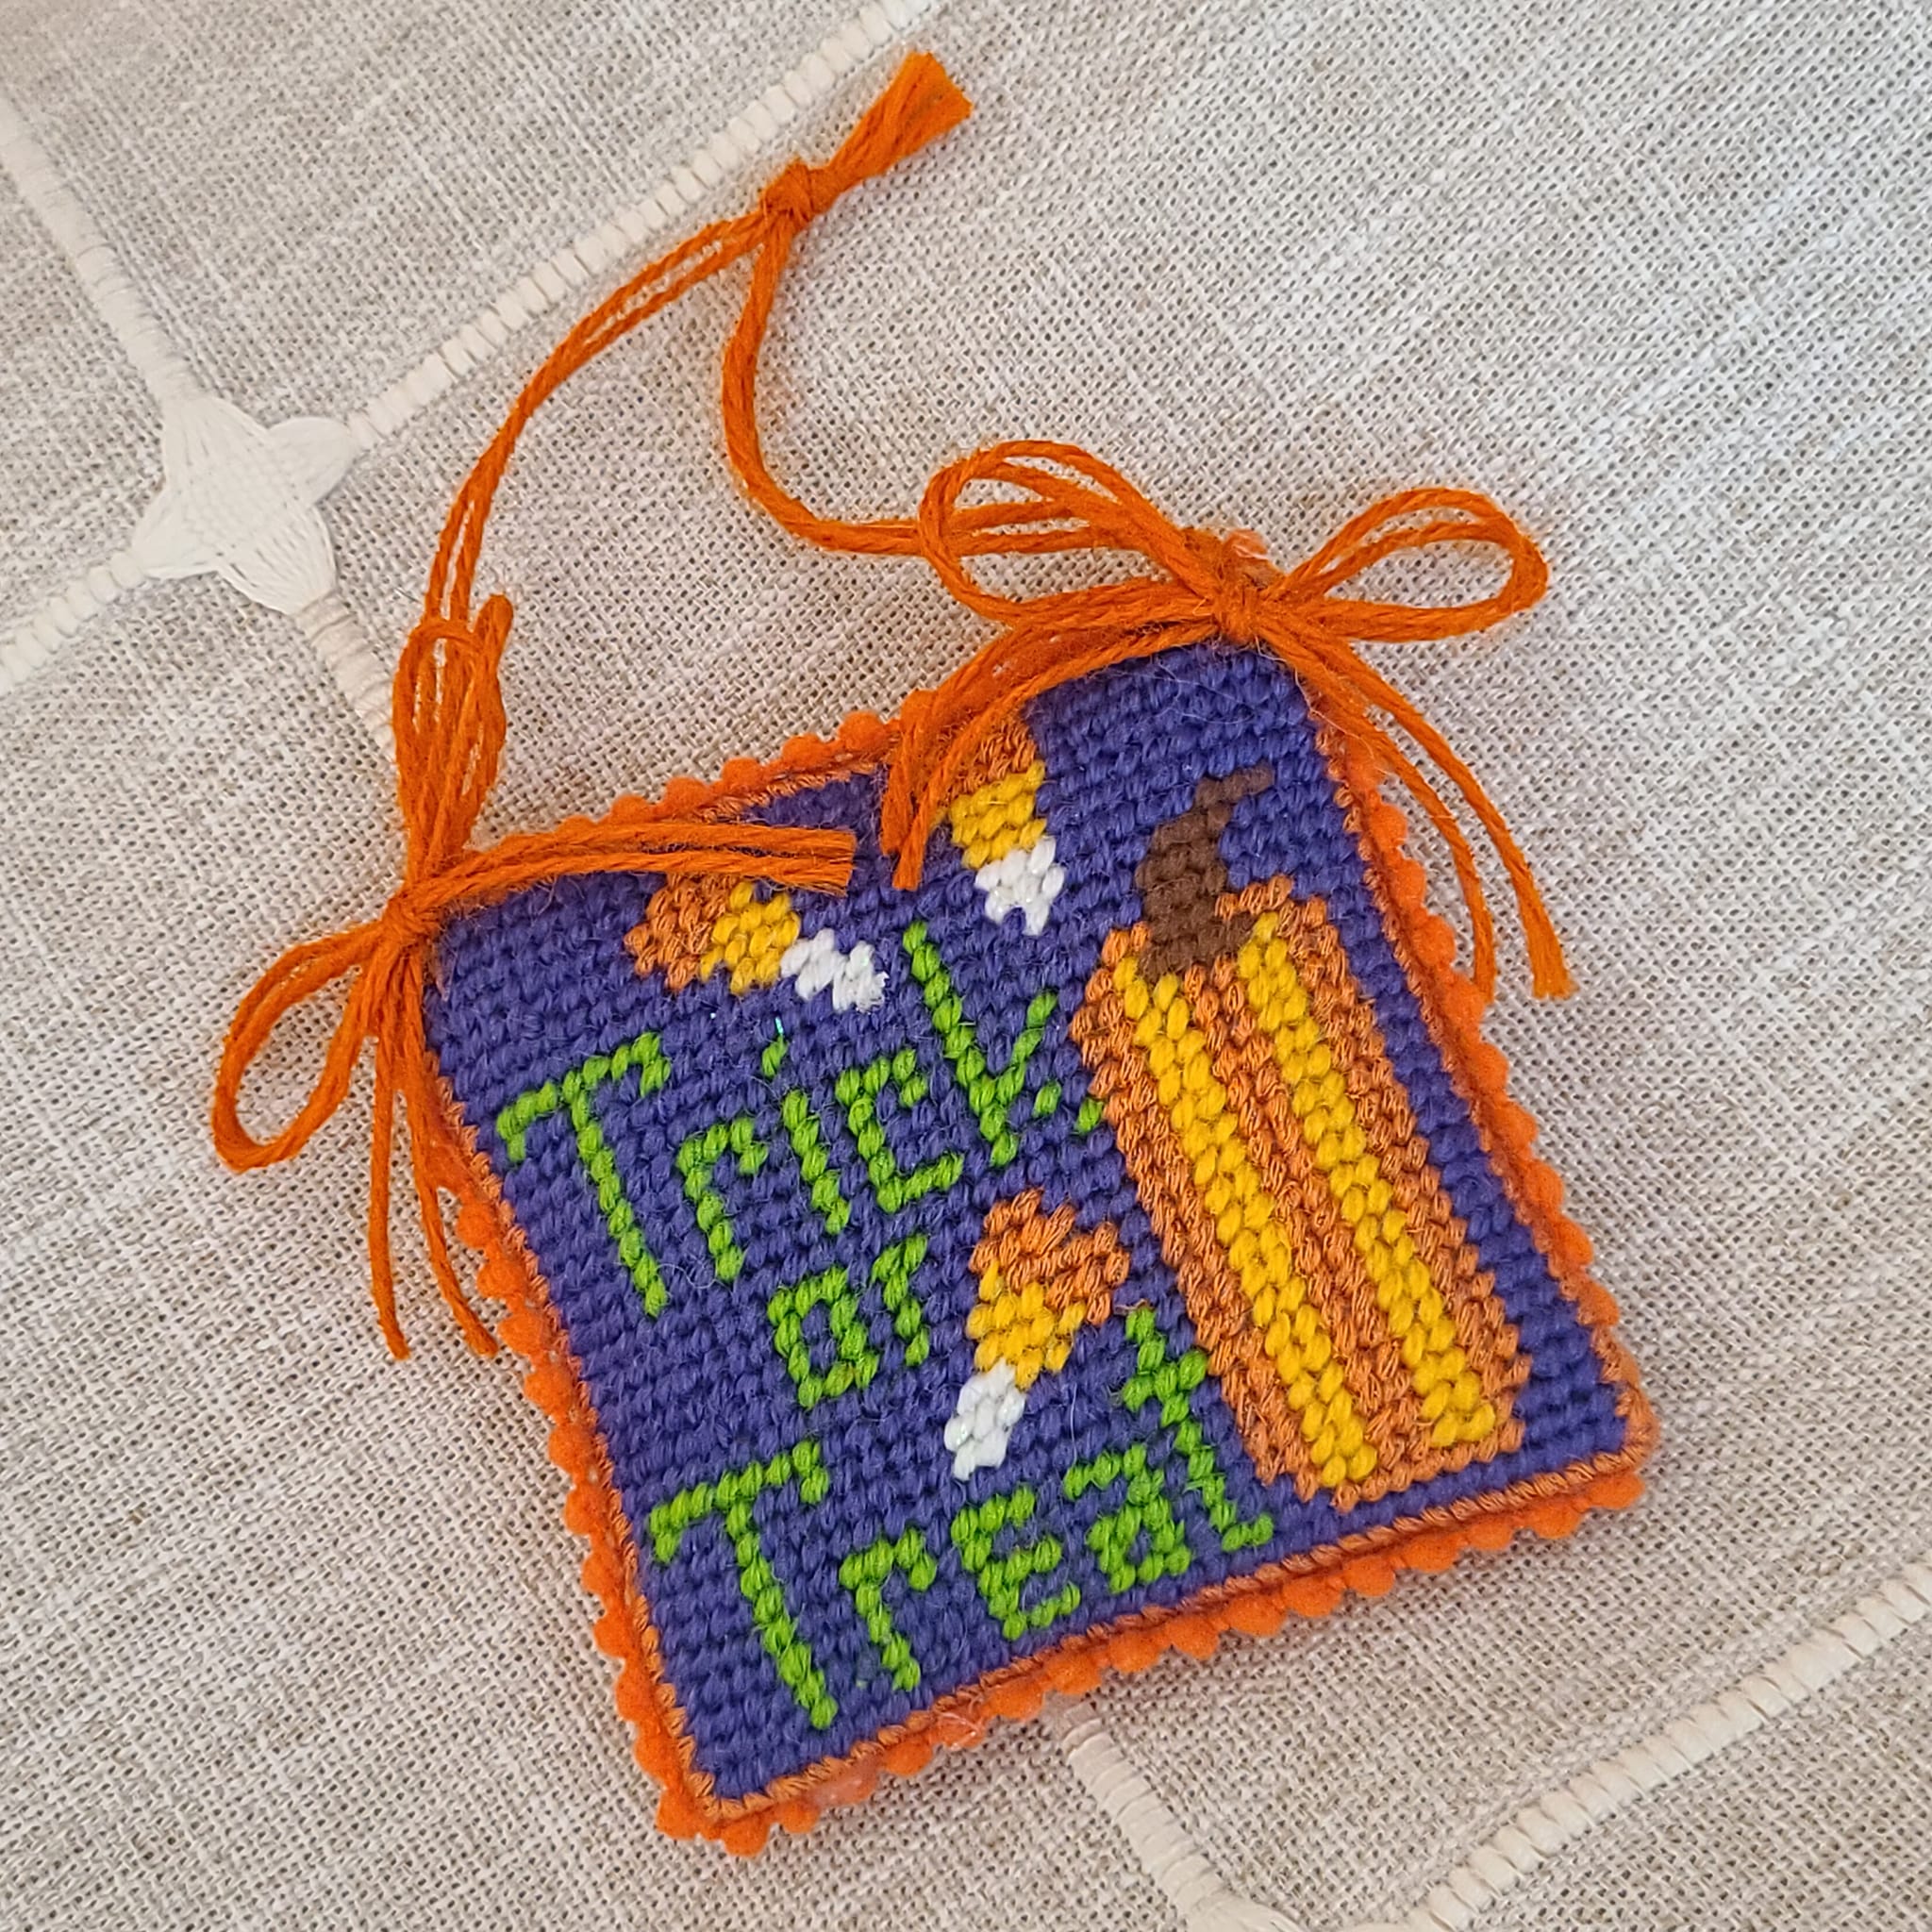 Halloween finished needlepoint Trick or Treat pumpkin candy corn